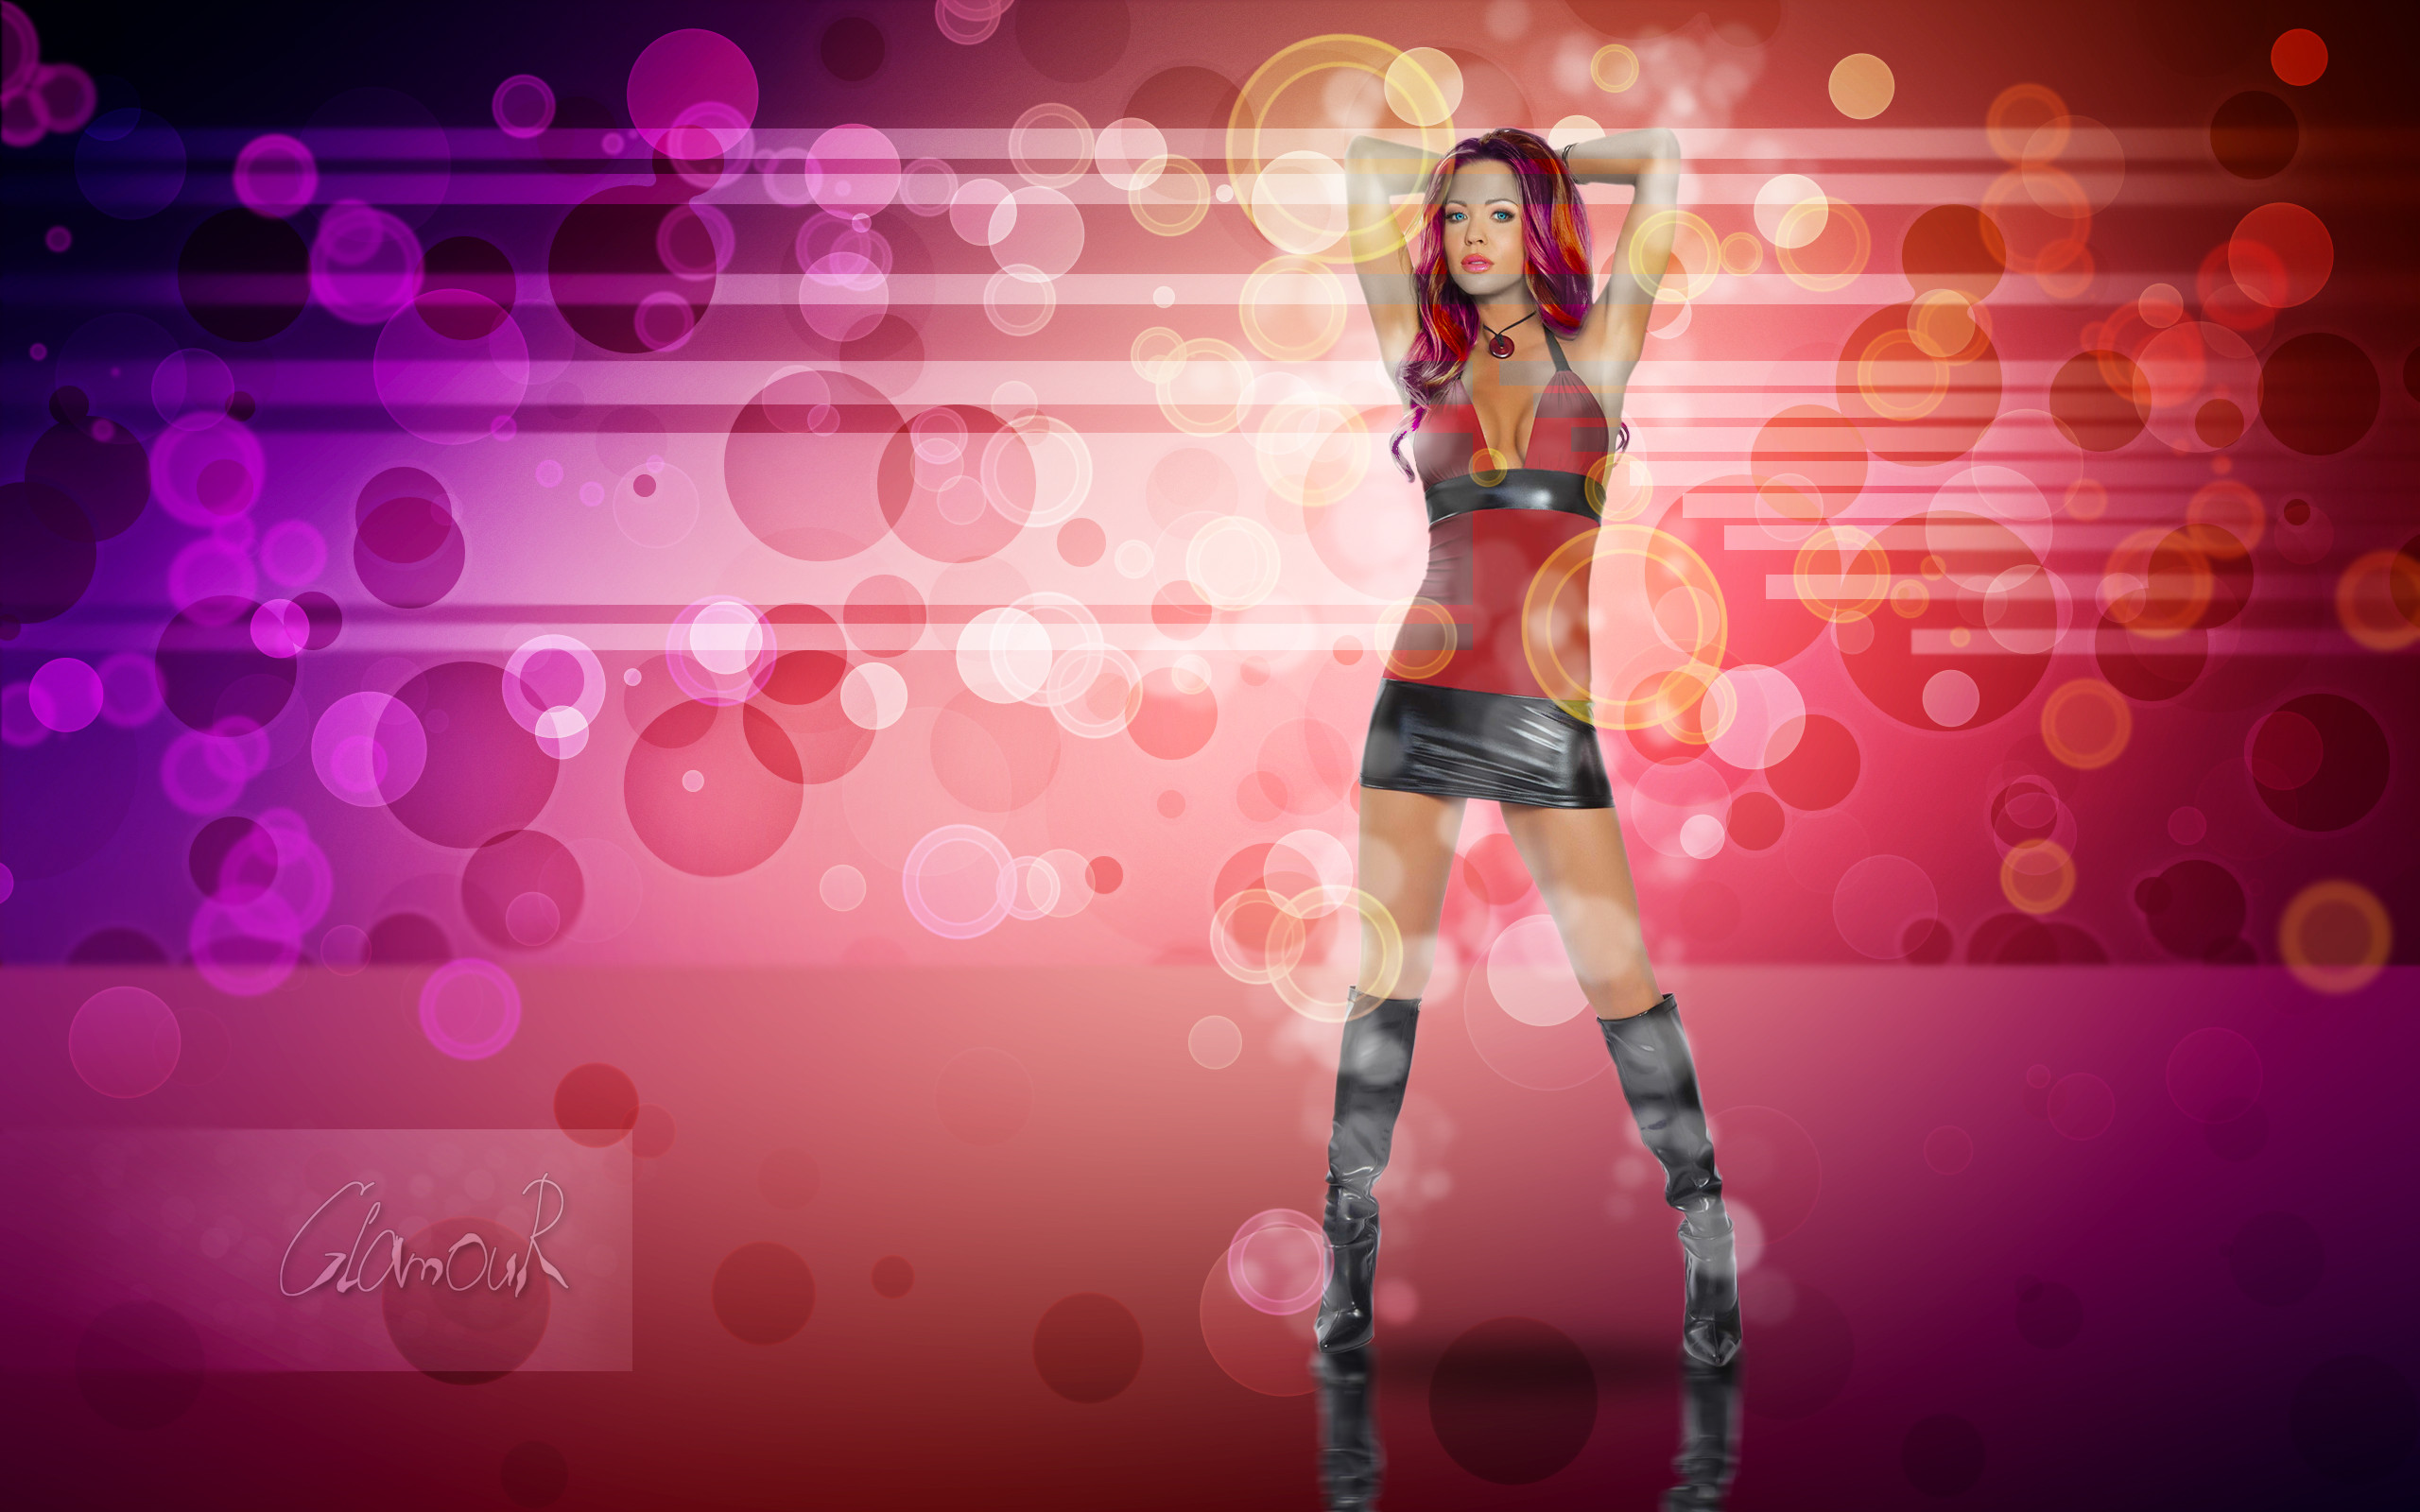 Glamour wallpaper by Hazzegan on